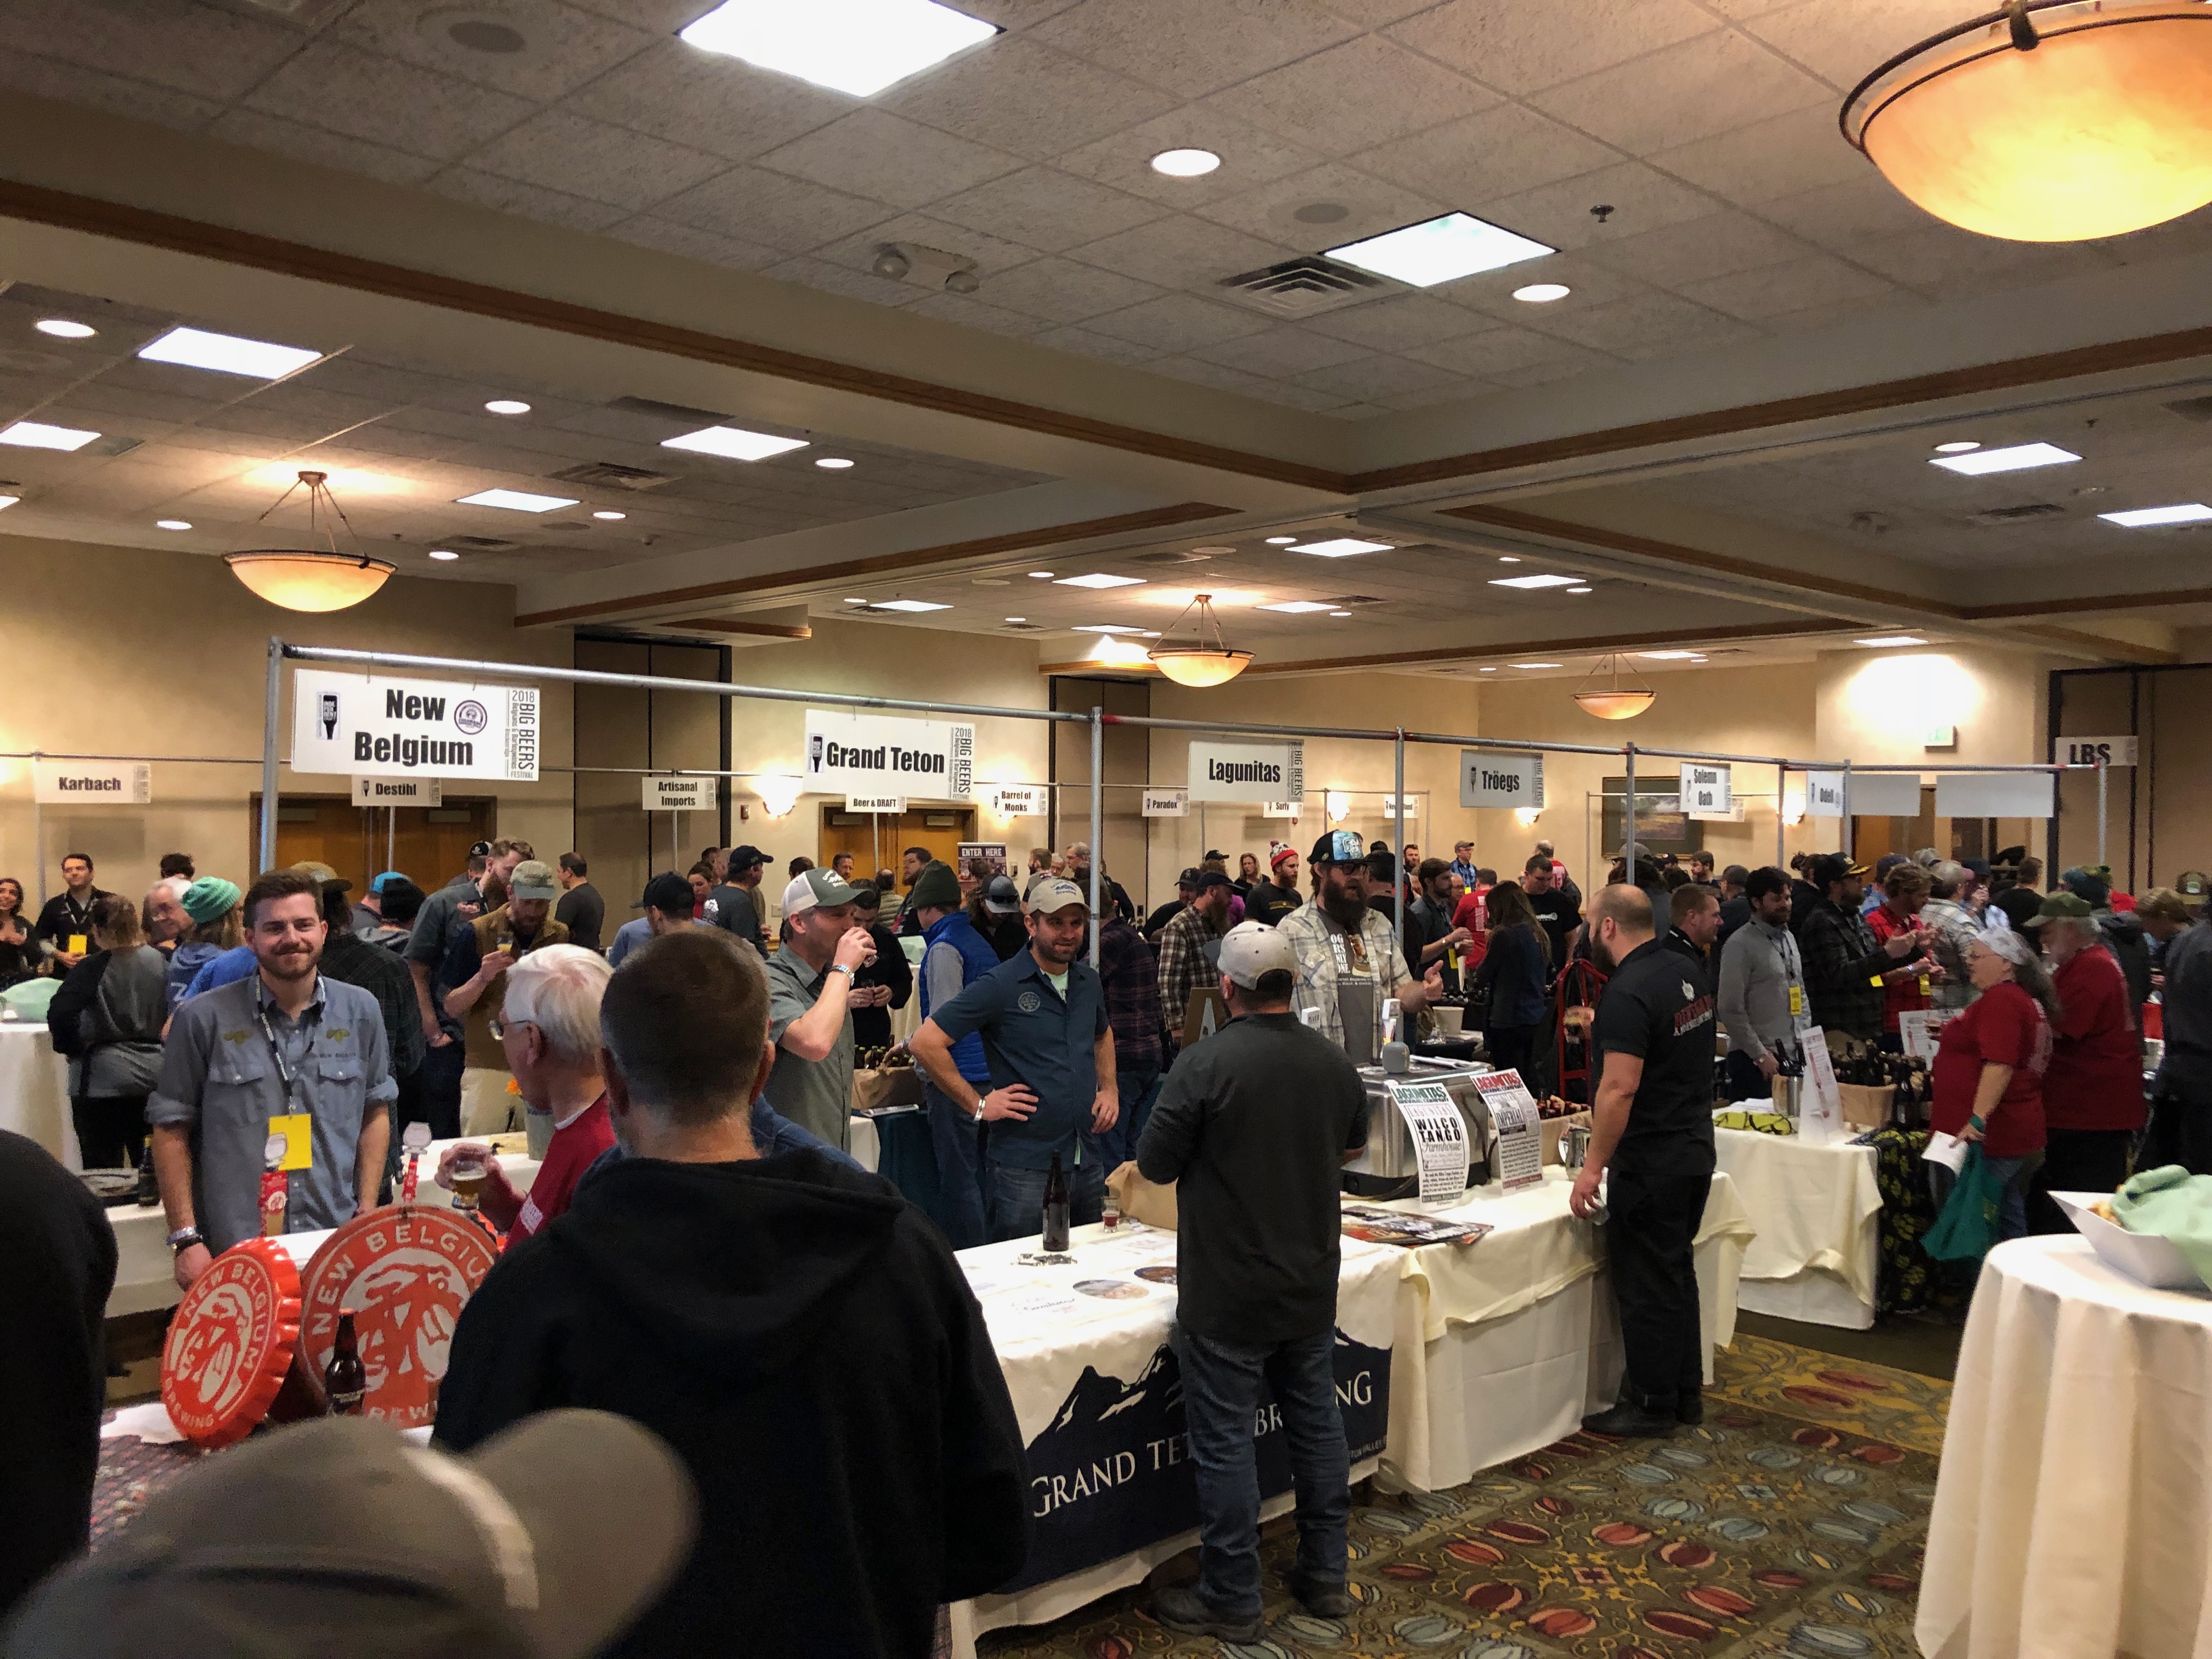 The first floor of the two floor lever at Beaver Run Resort during the 2018 Big Beers, Belgians & Barleywines Festival.